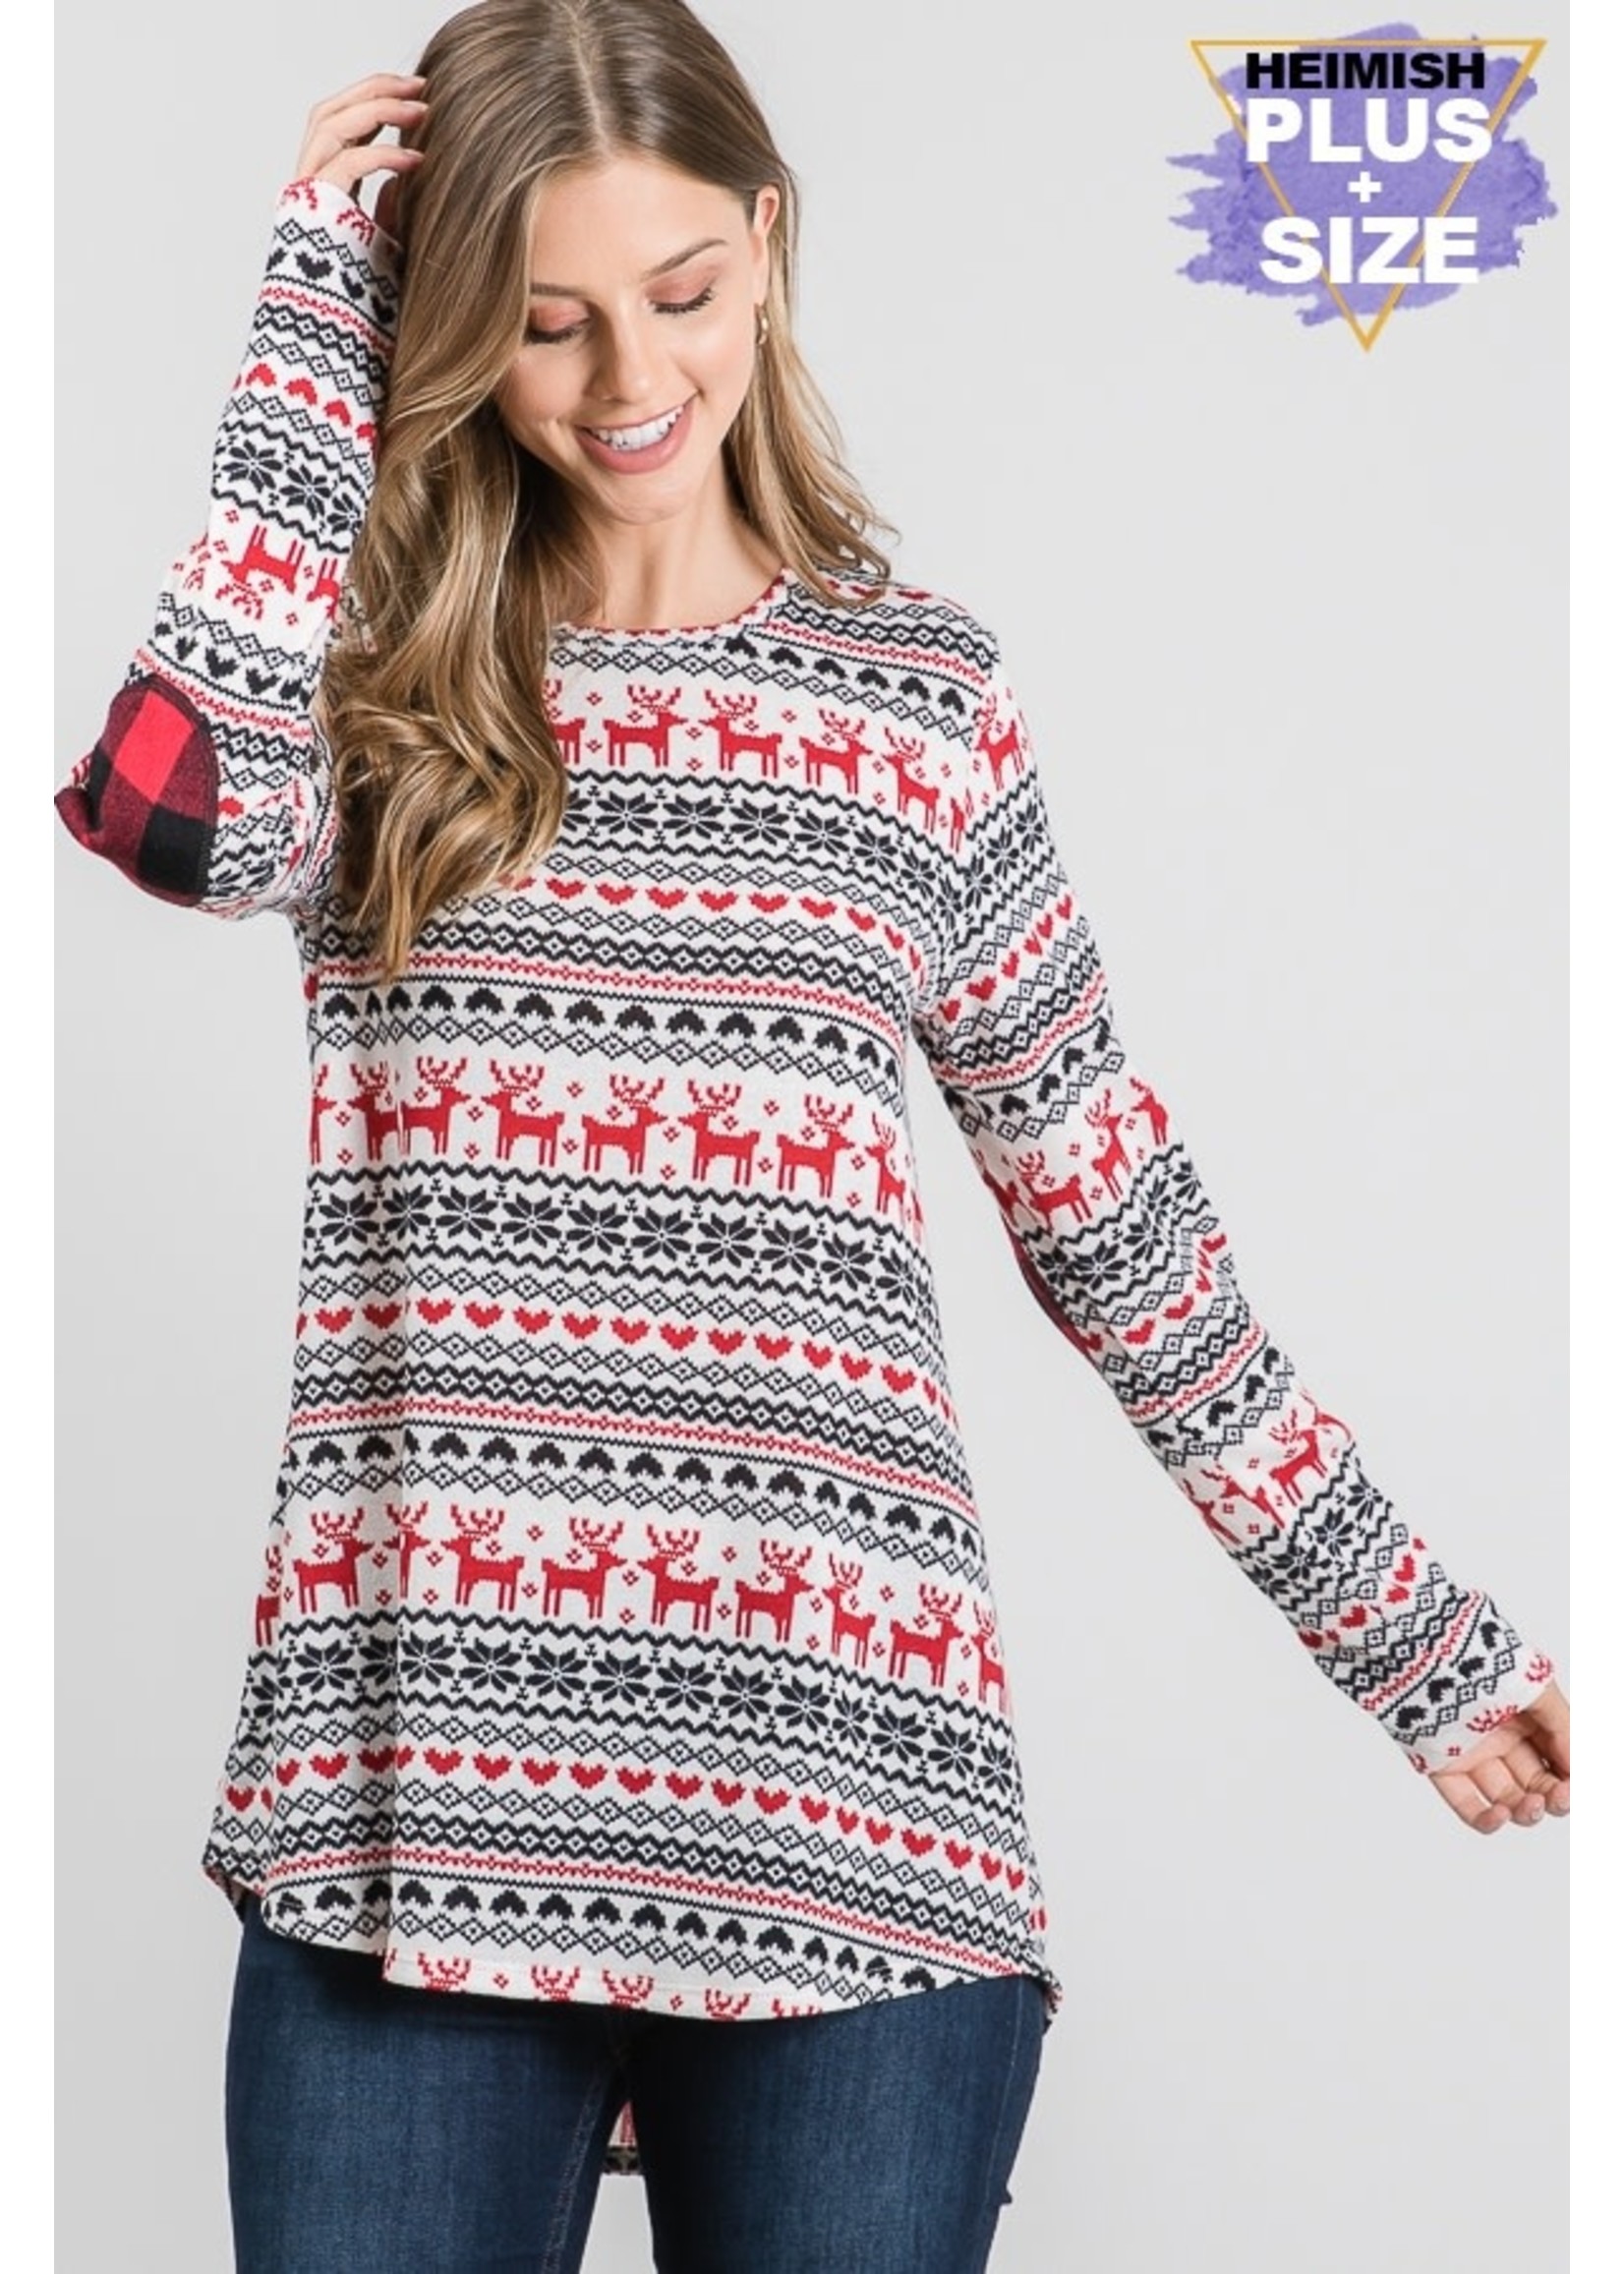 Heimish Reindeer Xmas Print Top w/ Patch Elbow - WHT/RED